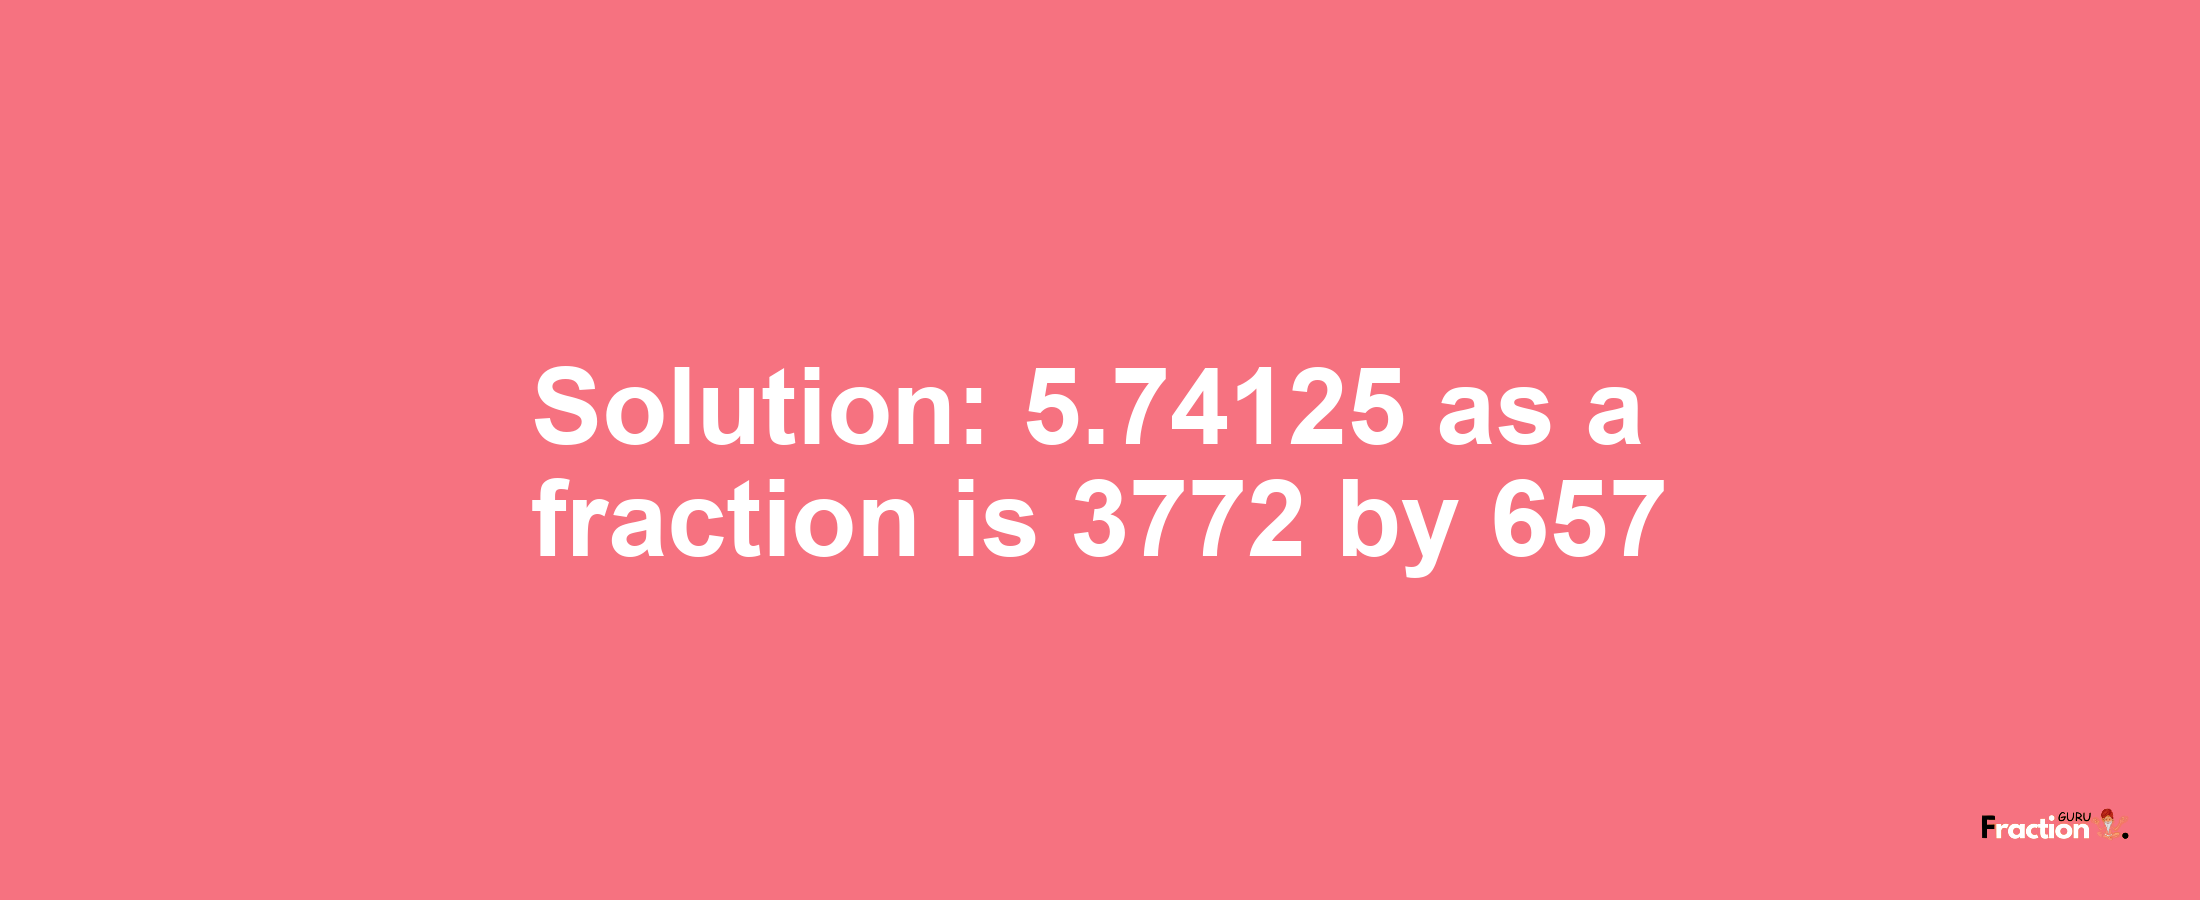 Solution:5.74125 as a fraction is 3772/657